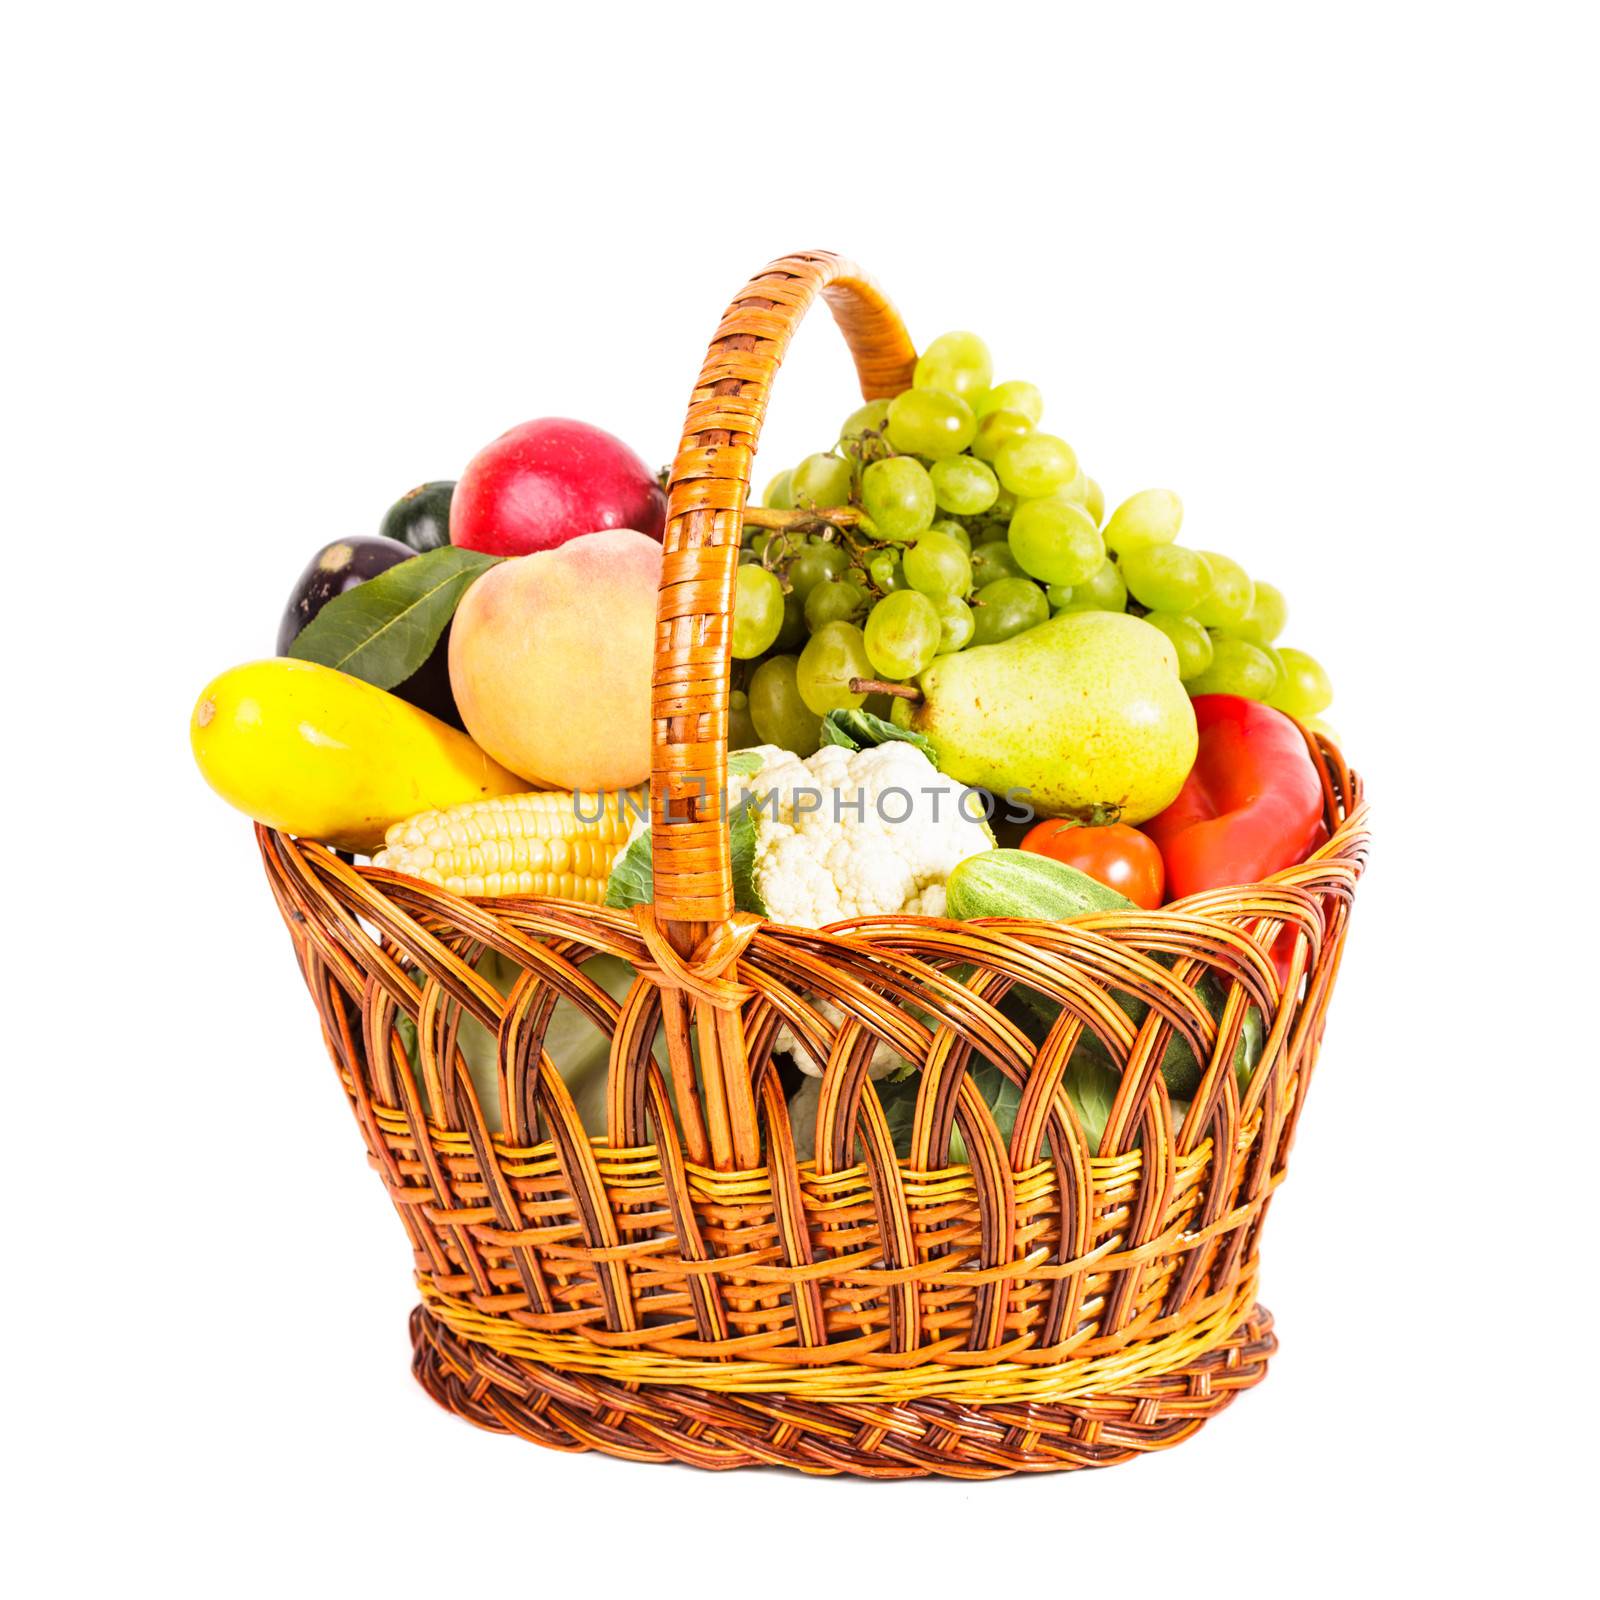 Basket of vegetables and fruits by oksix